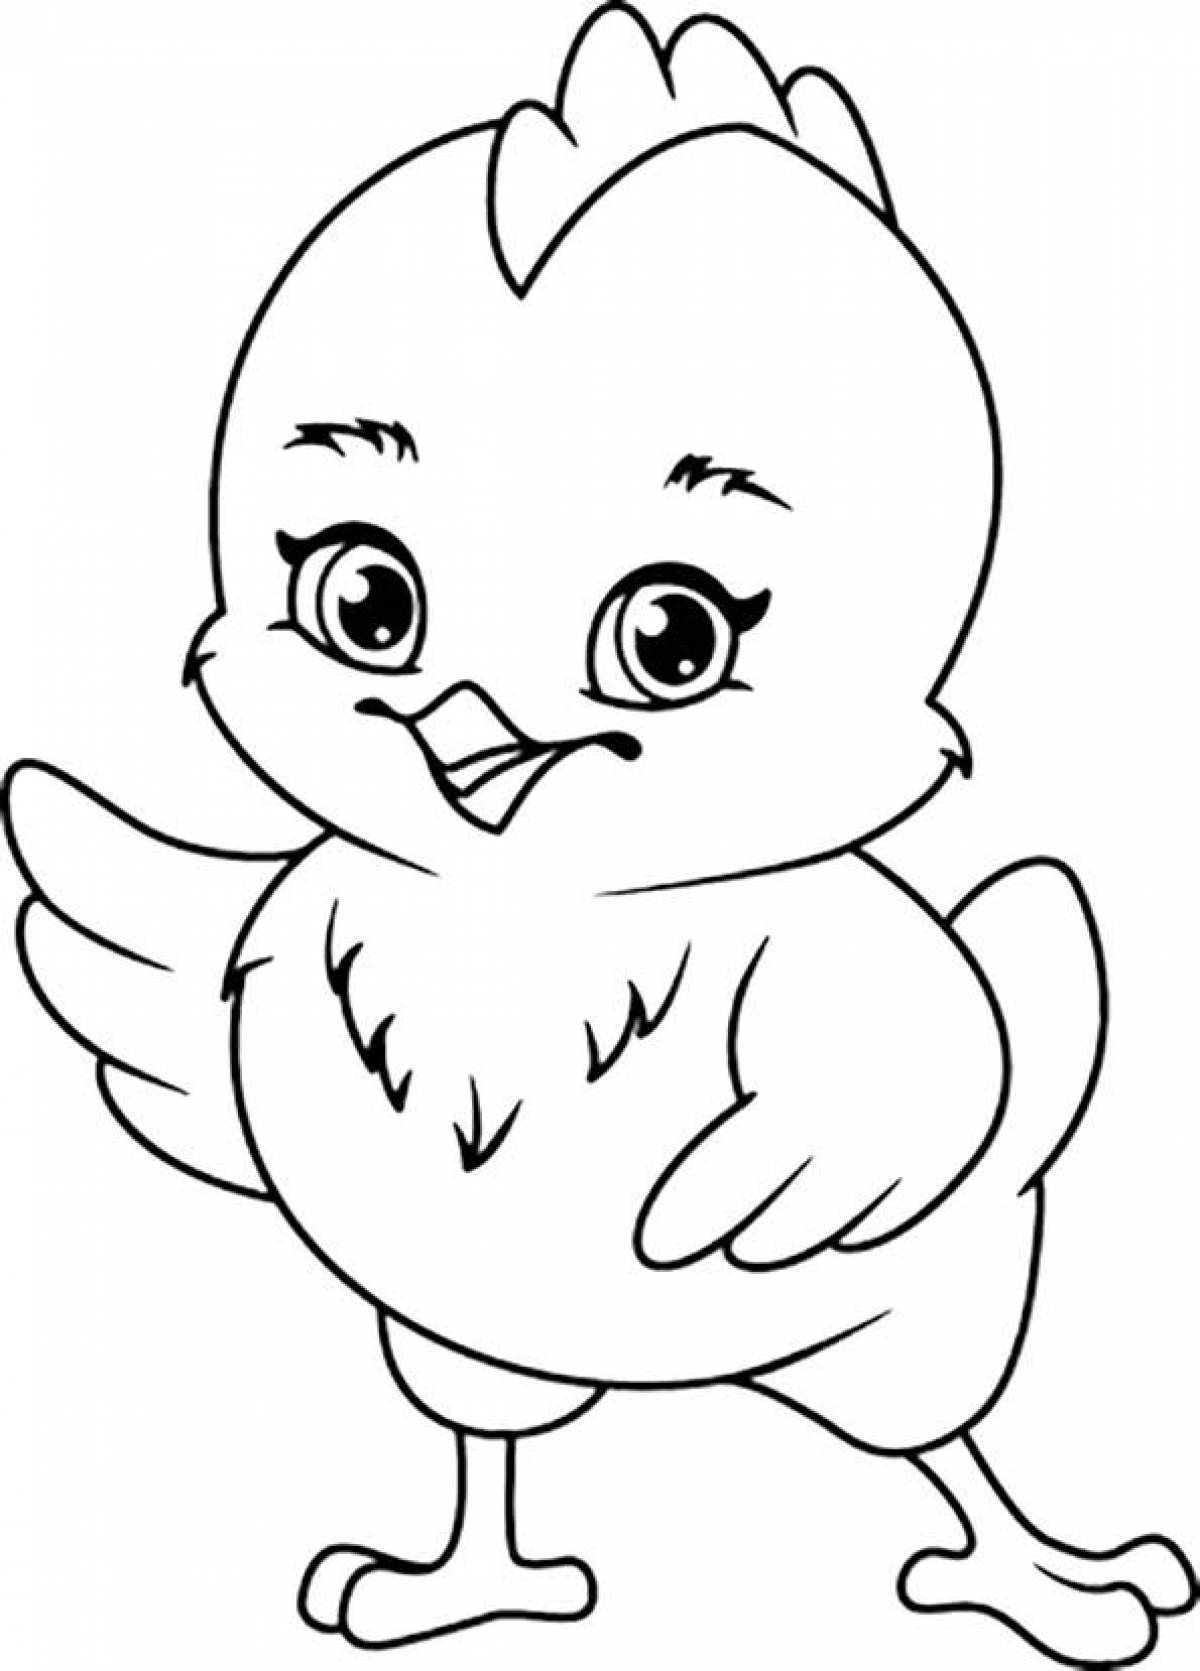 Coloring page blessed chicken for children 2-3 years old